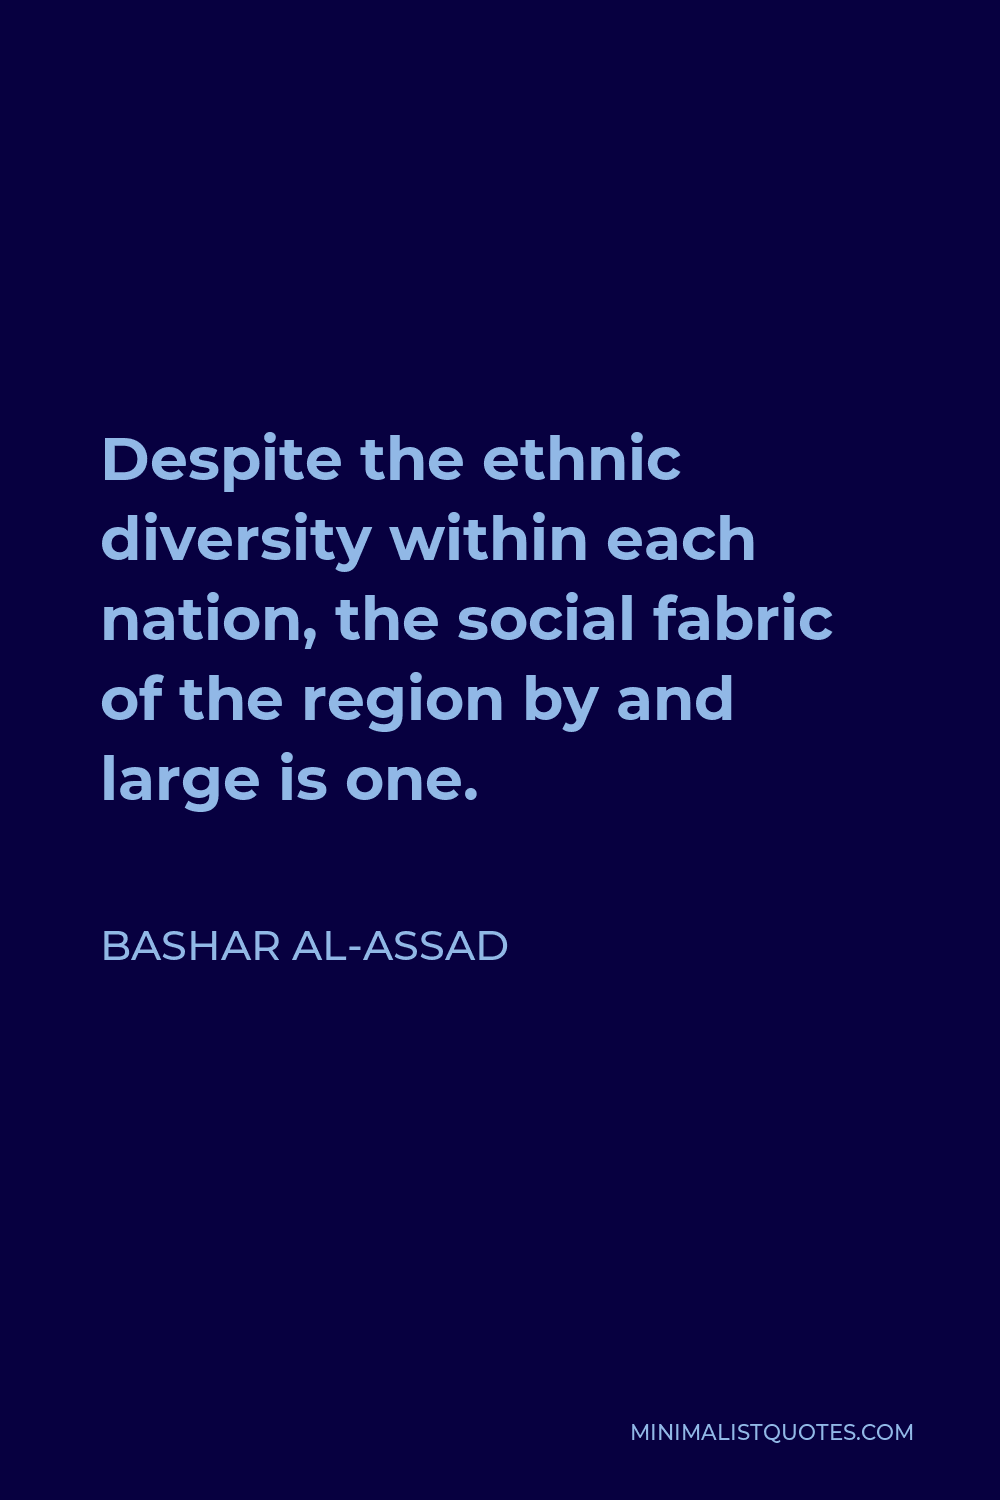 Bashar al-Assad Quote - Despite the ethnic diversity within each nation, the social fabric of the region by and large is one.